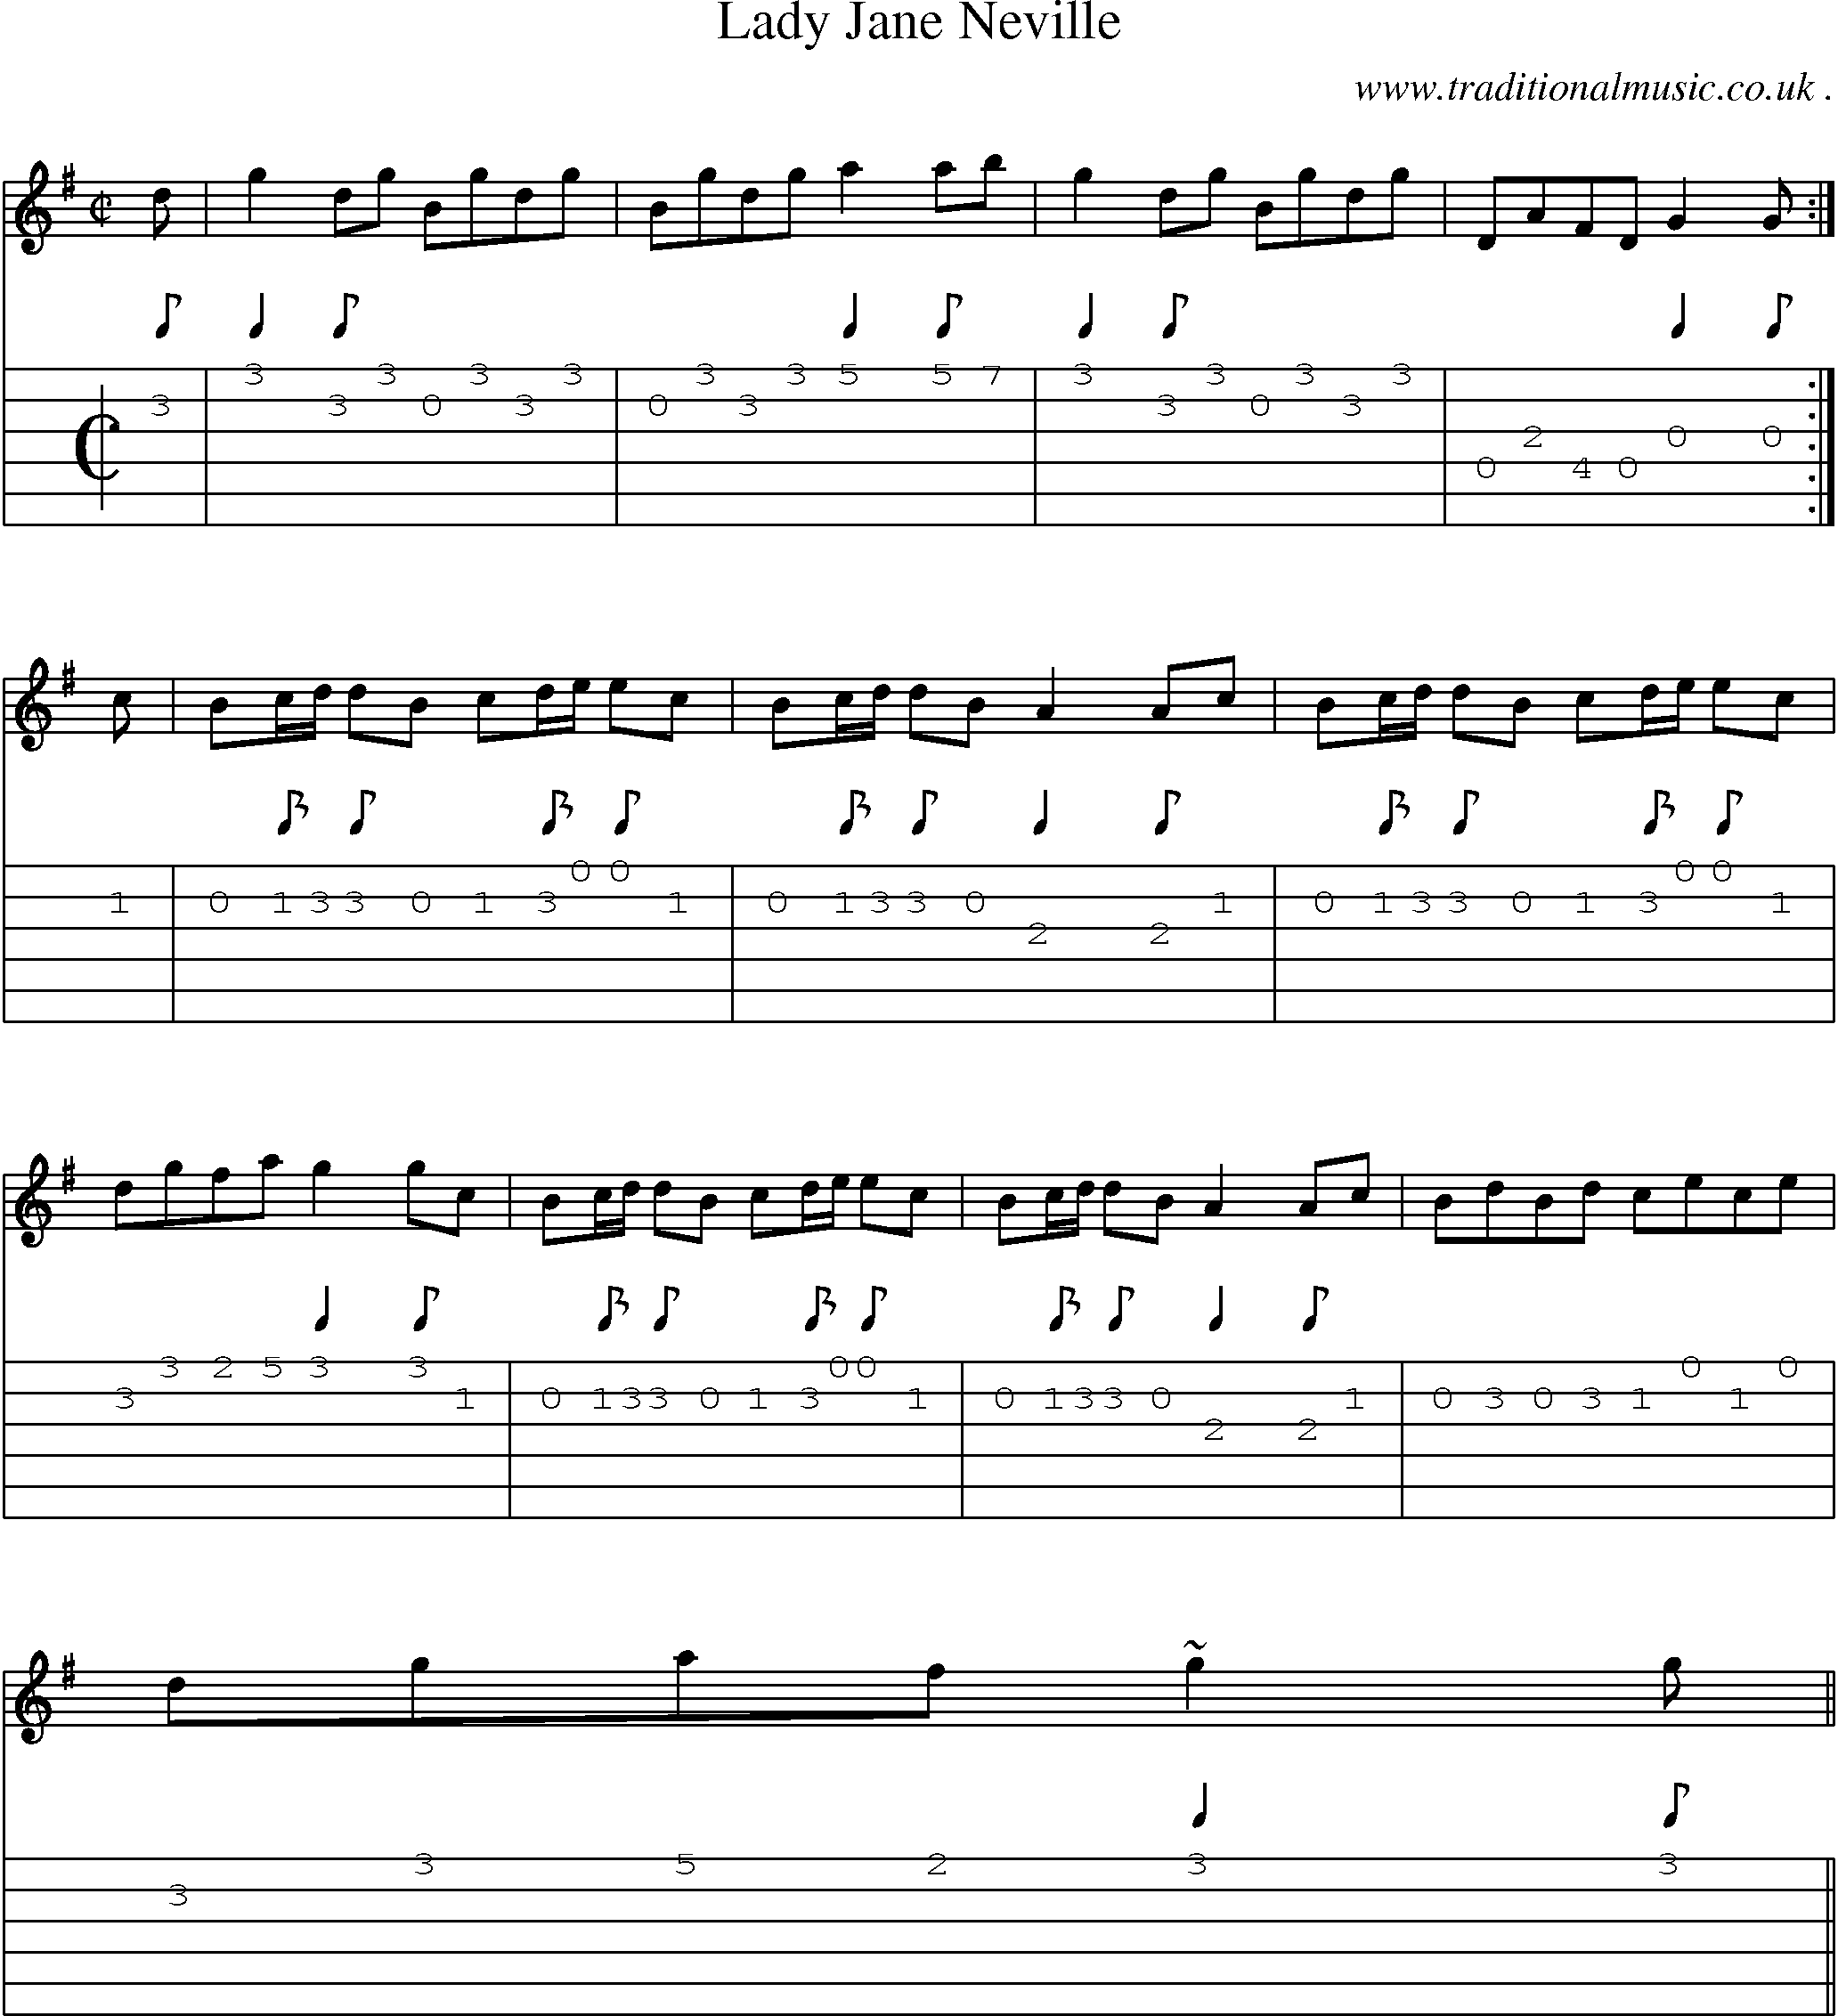 Sheet-music  score, Chords and Guitar Tabs for Lady Jane Neville